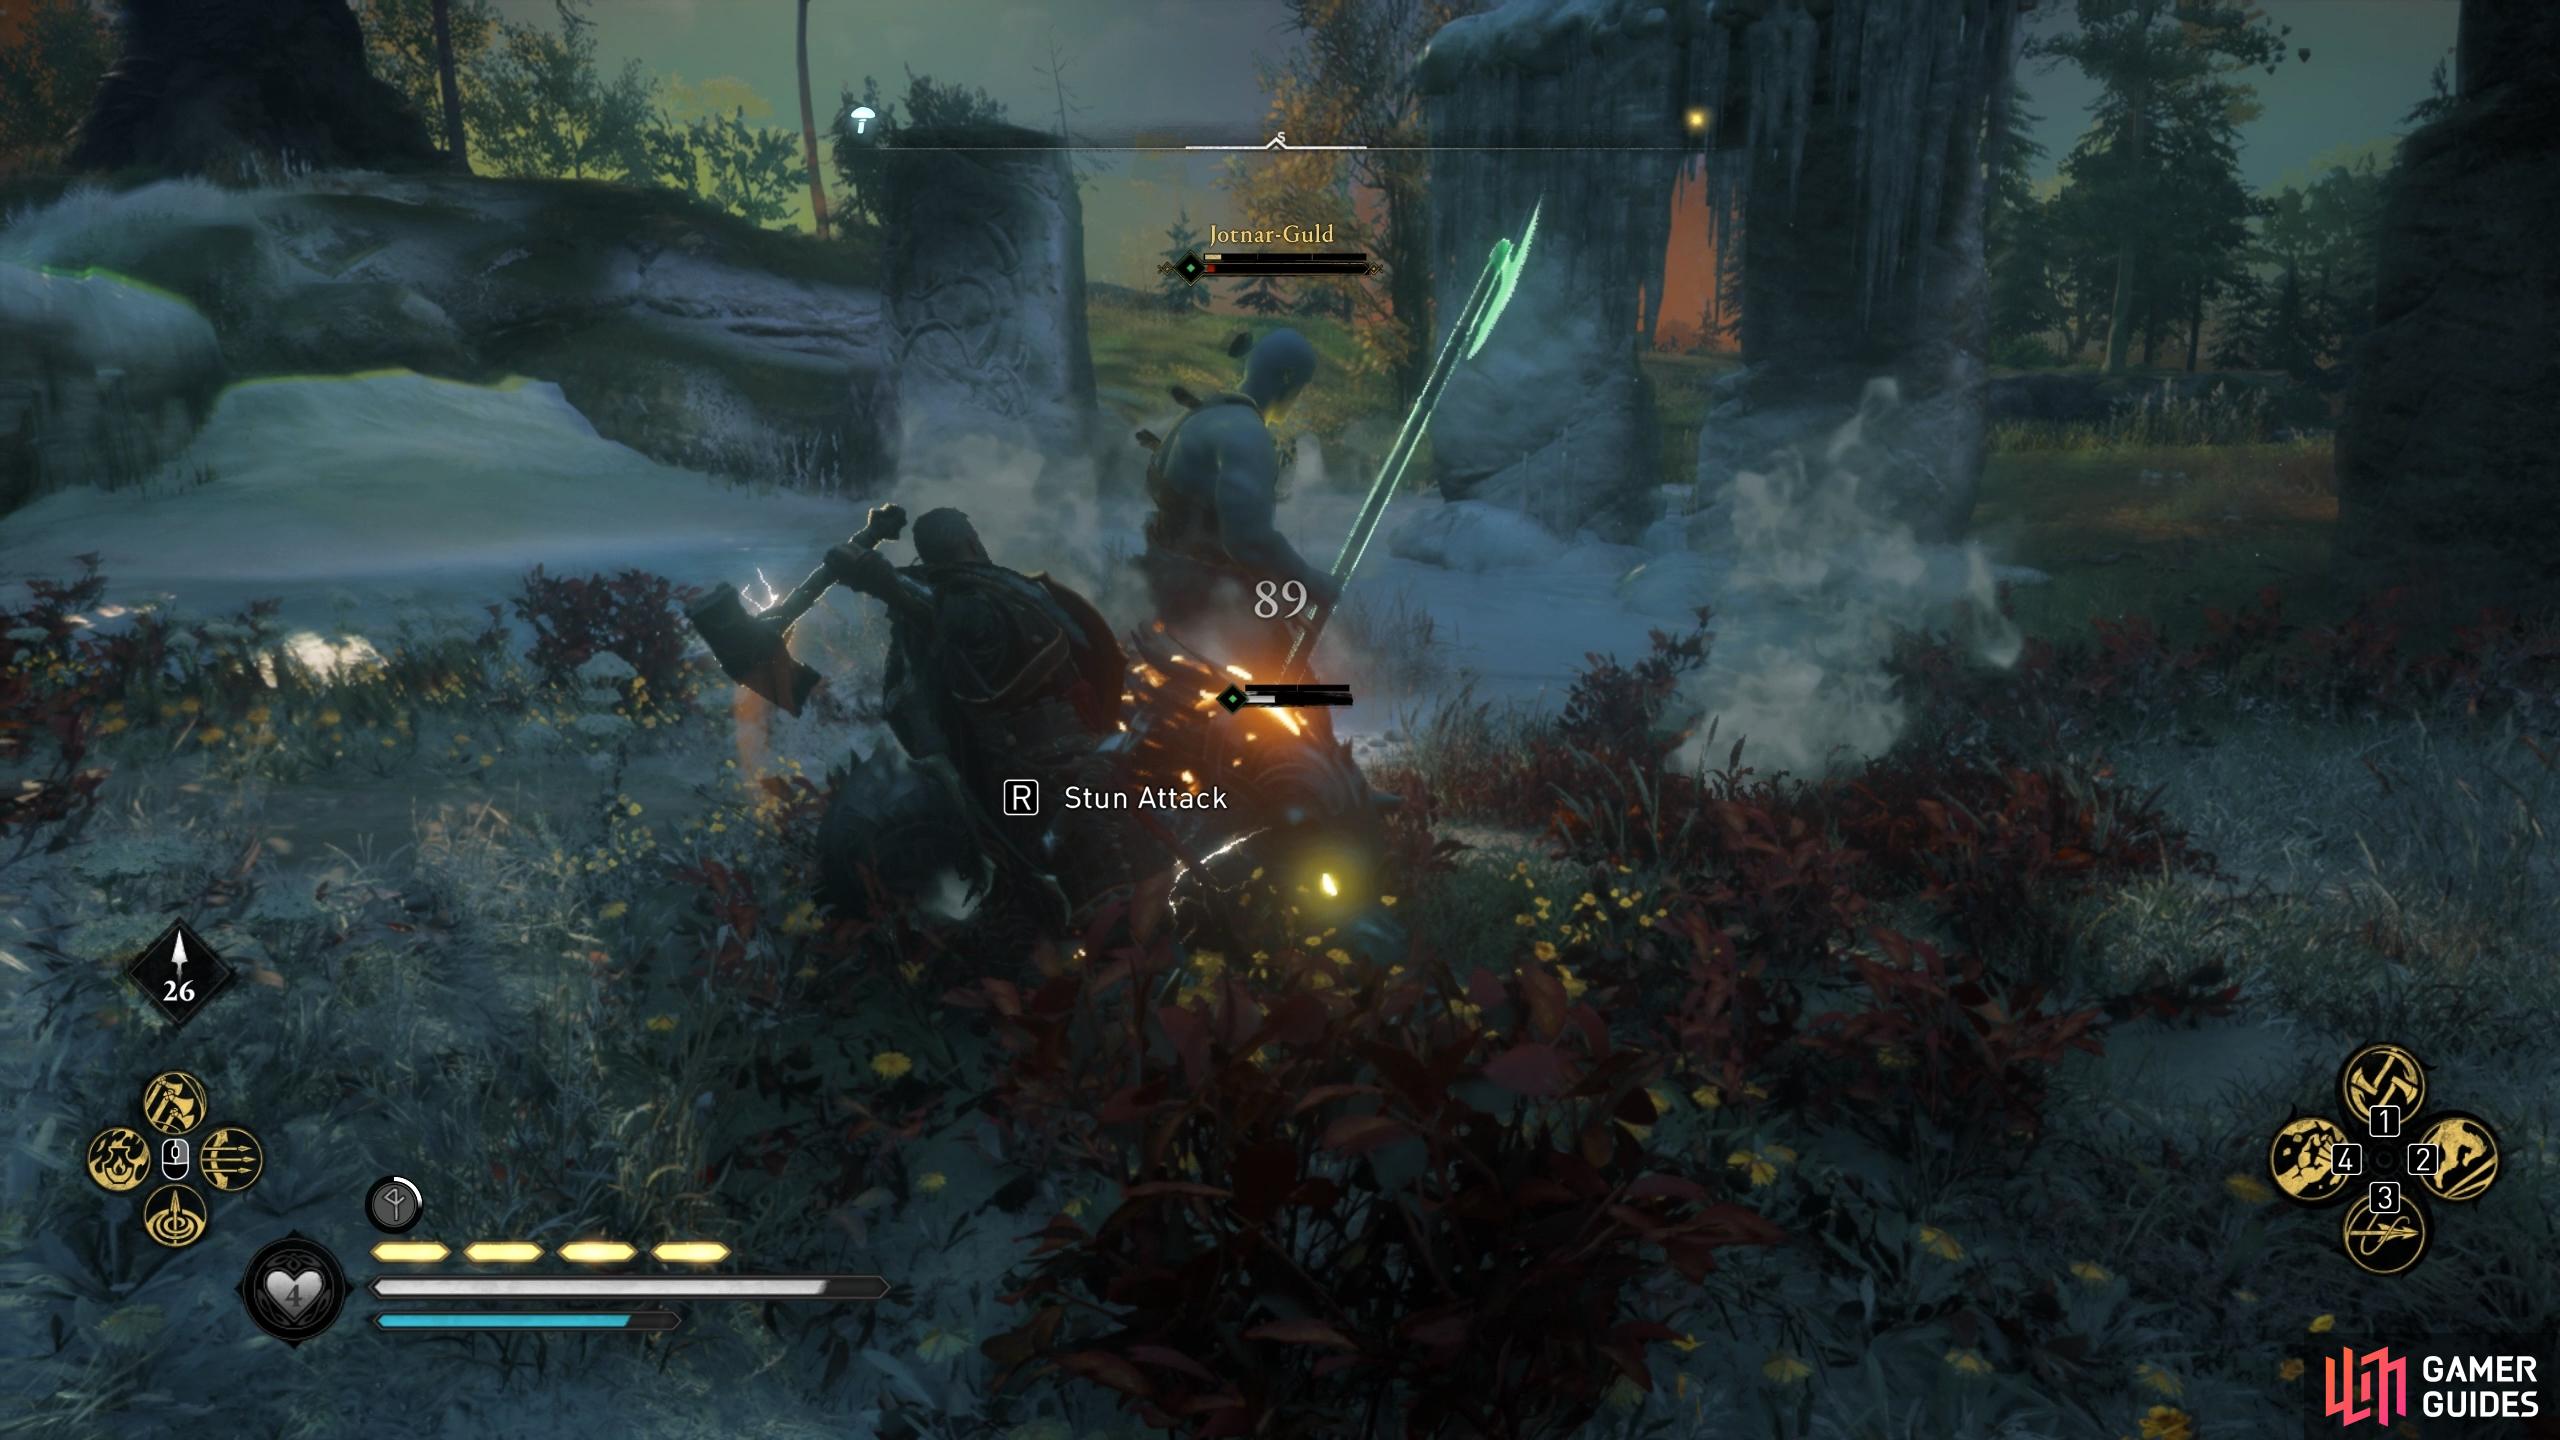 Once you've hit Ivarr's weak points, perform a stun attack to take a chunk of his health.